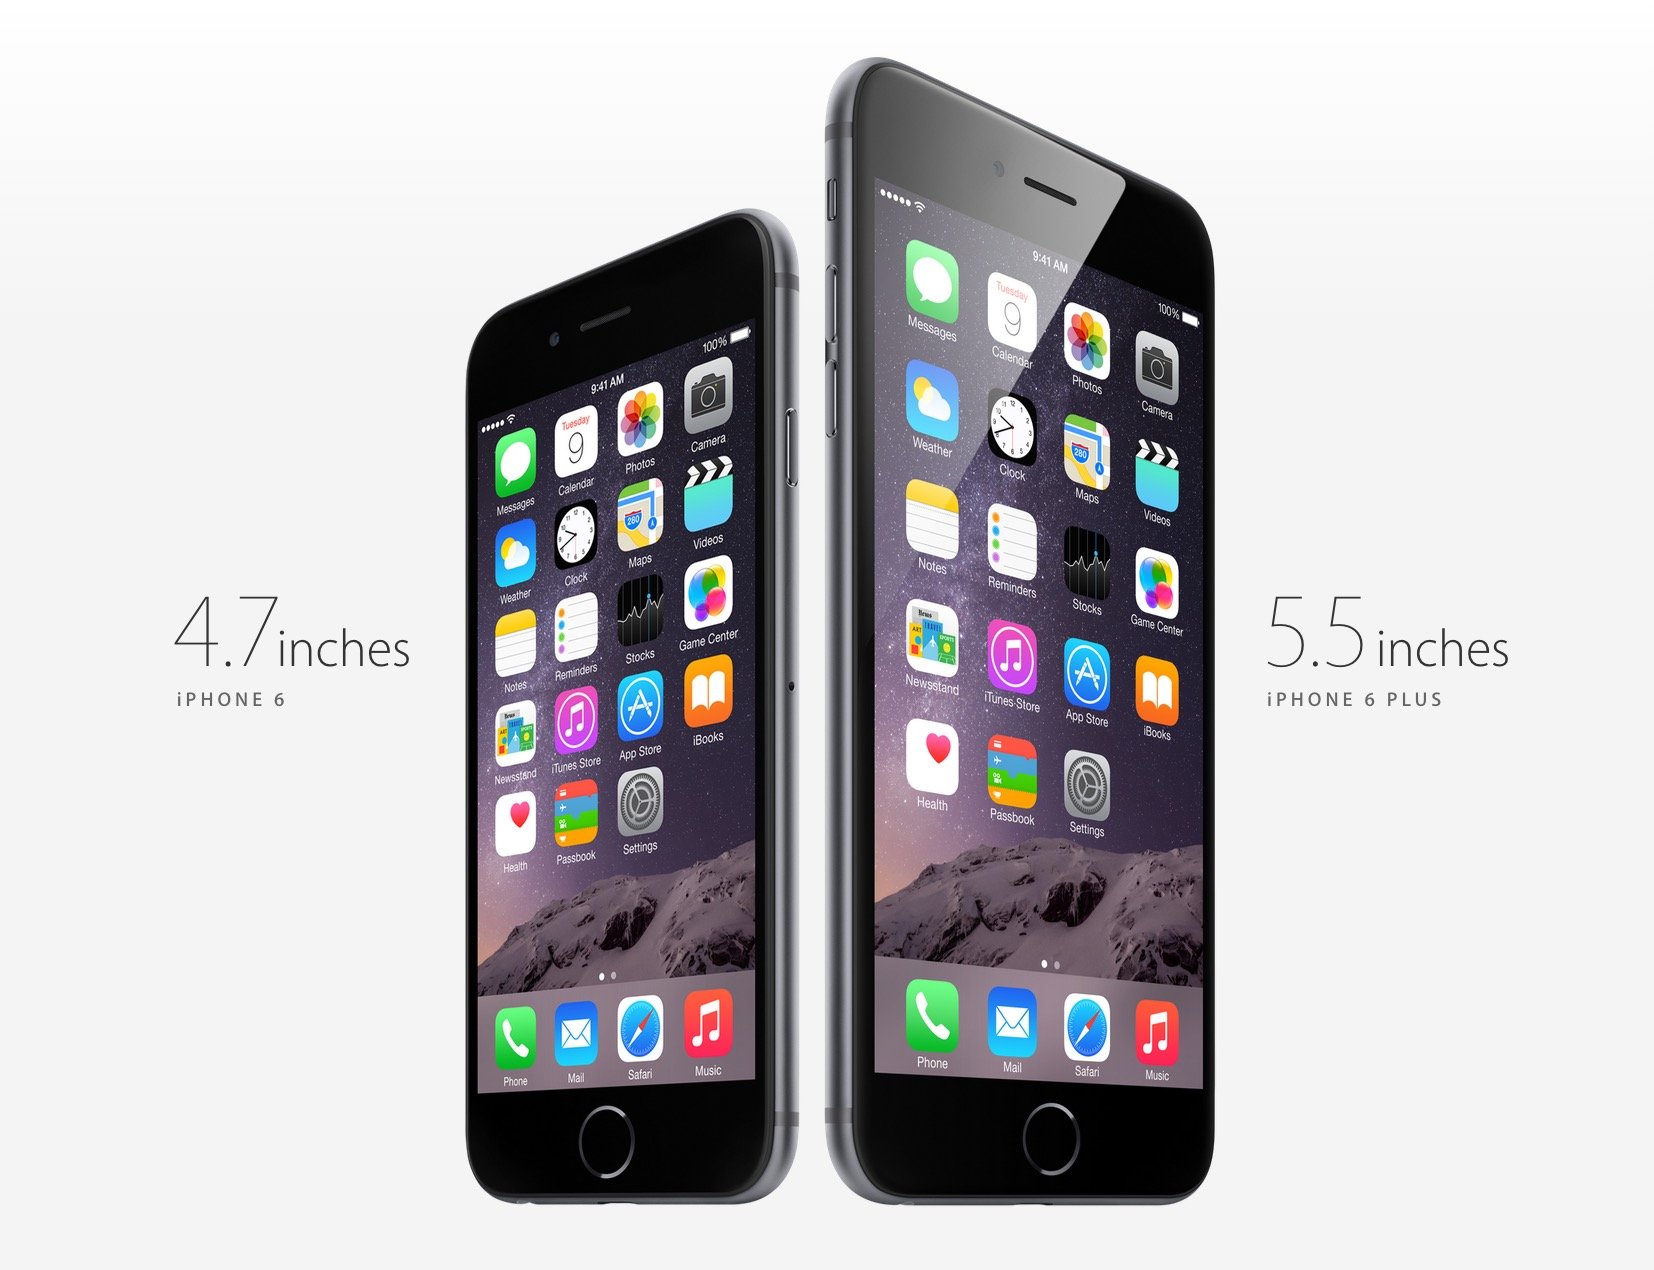 Here's a look at the iPhone 6 vs iPhone 6 Plus.